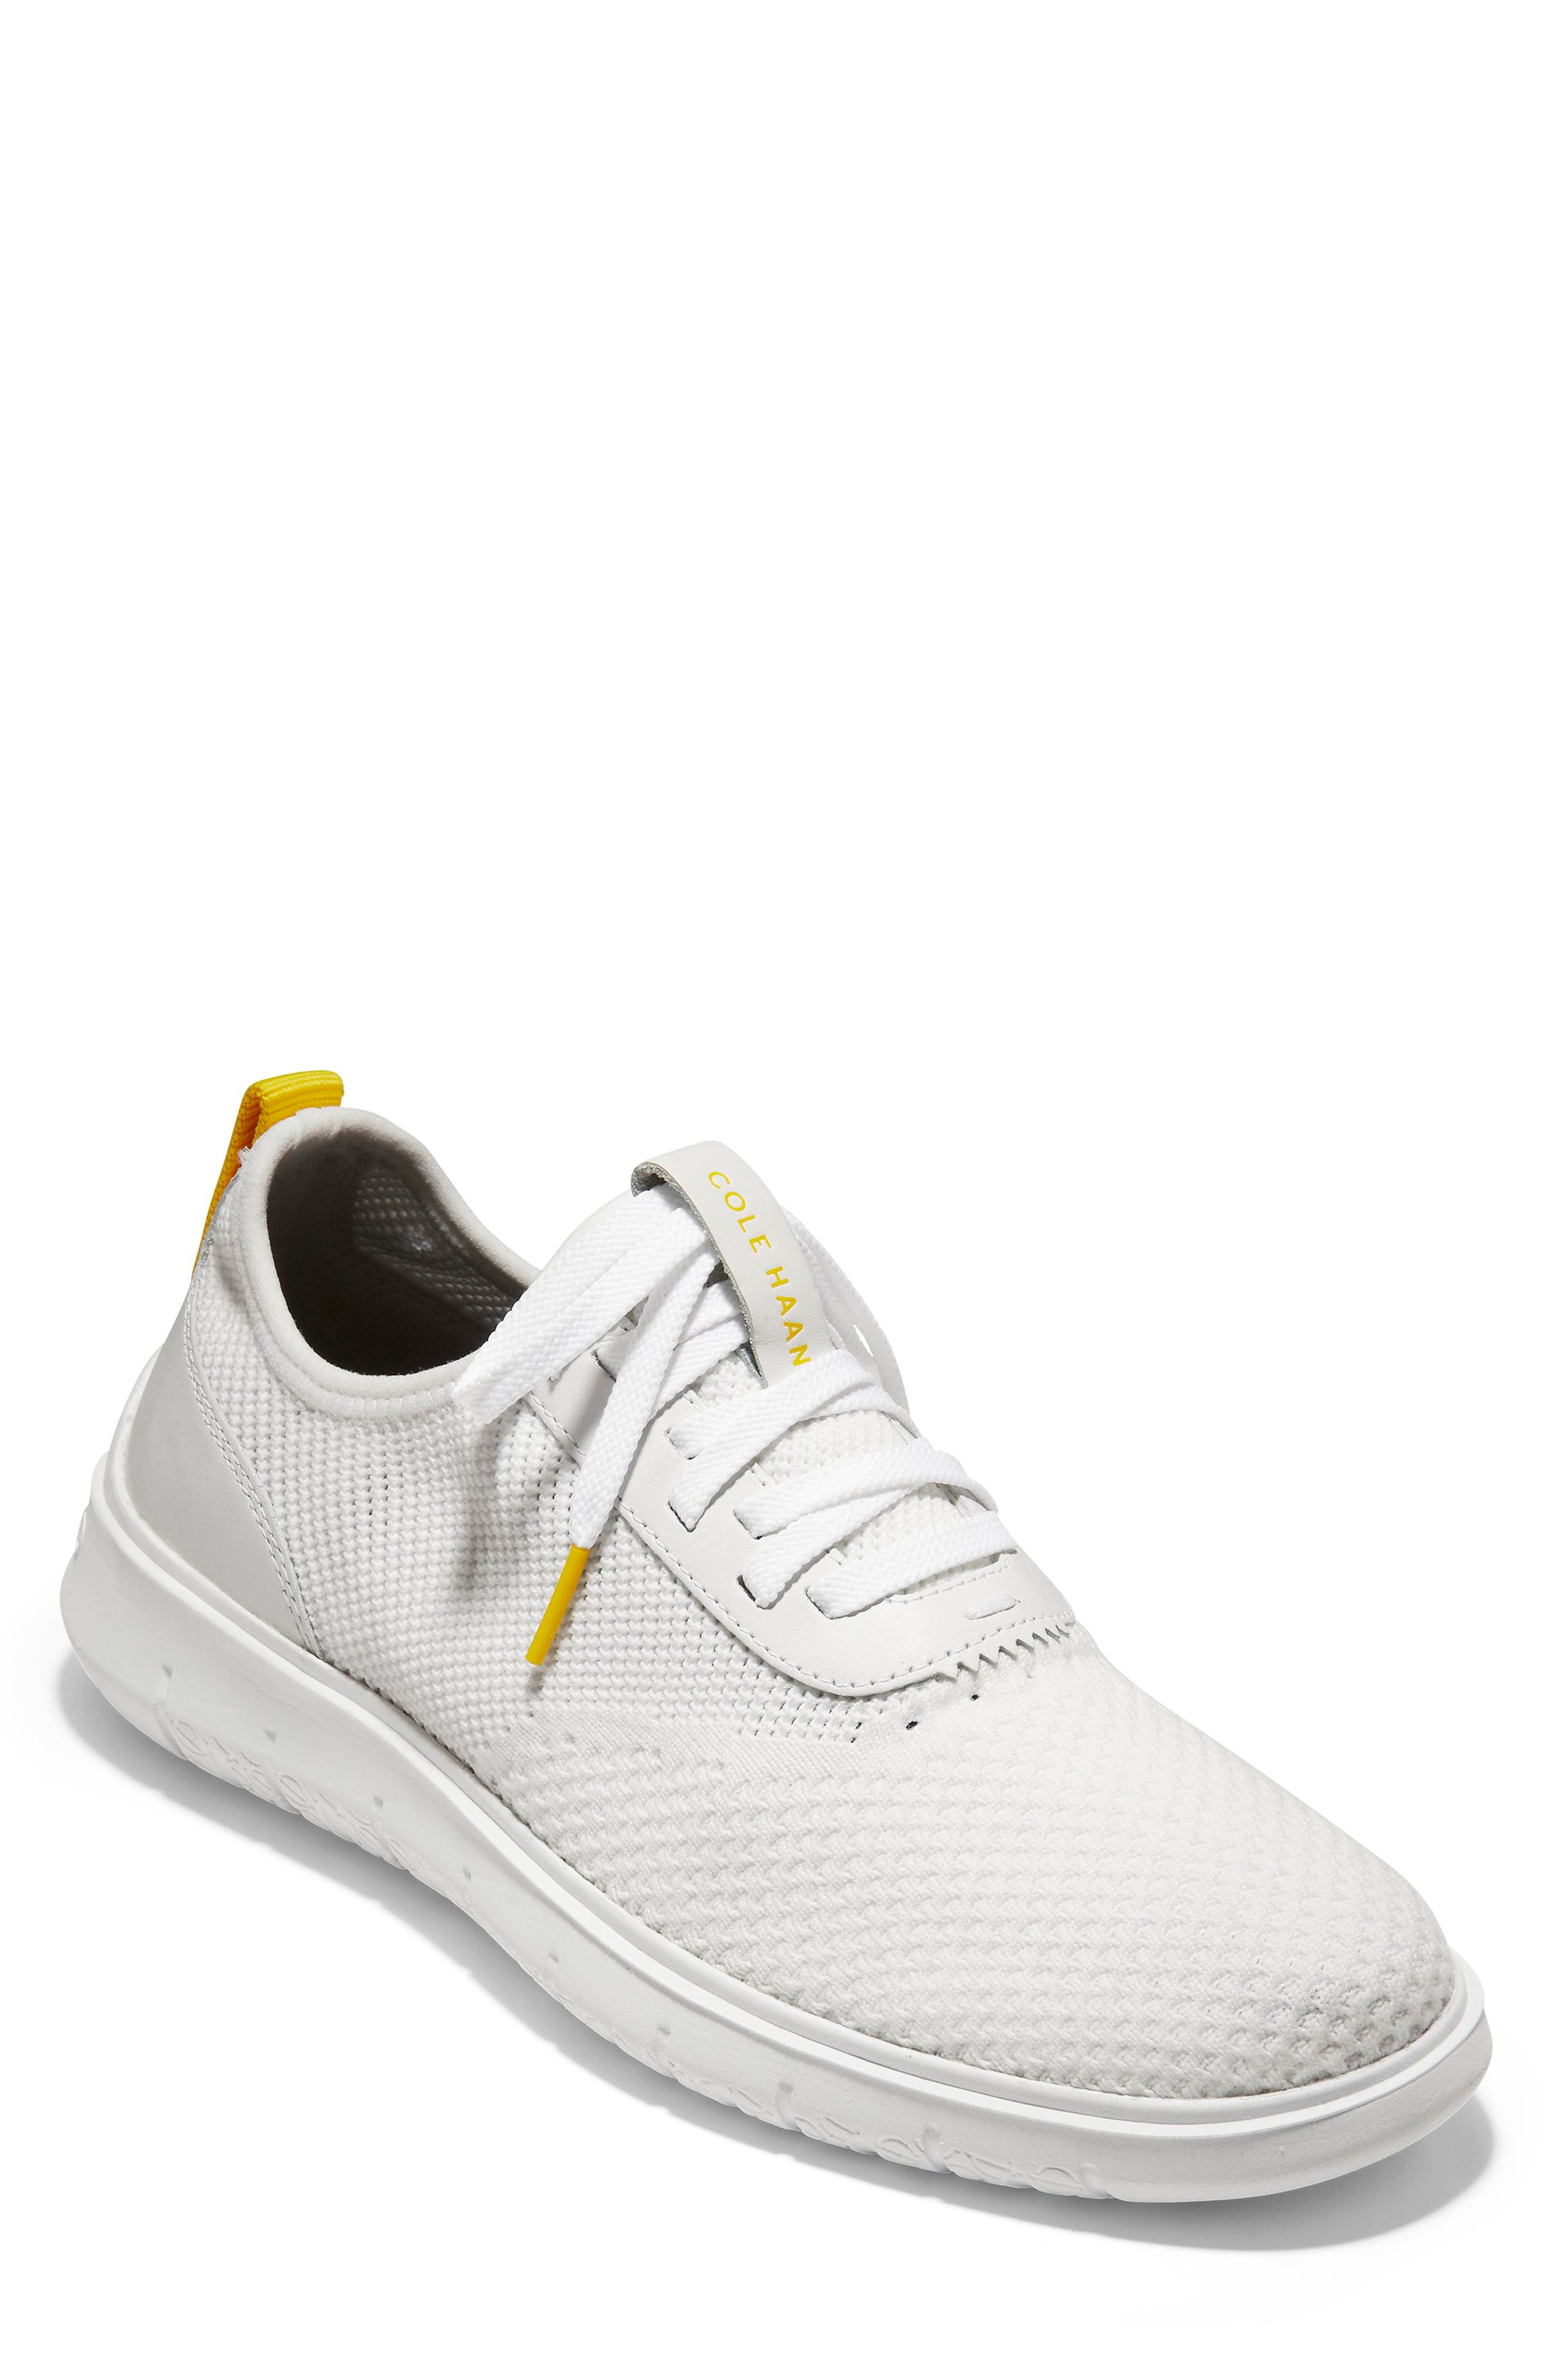 Men's White Sneakers \u0026 Athletic Shoes 